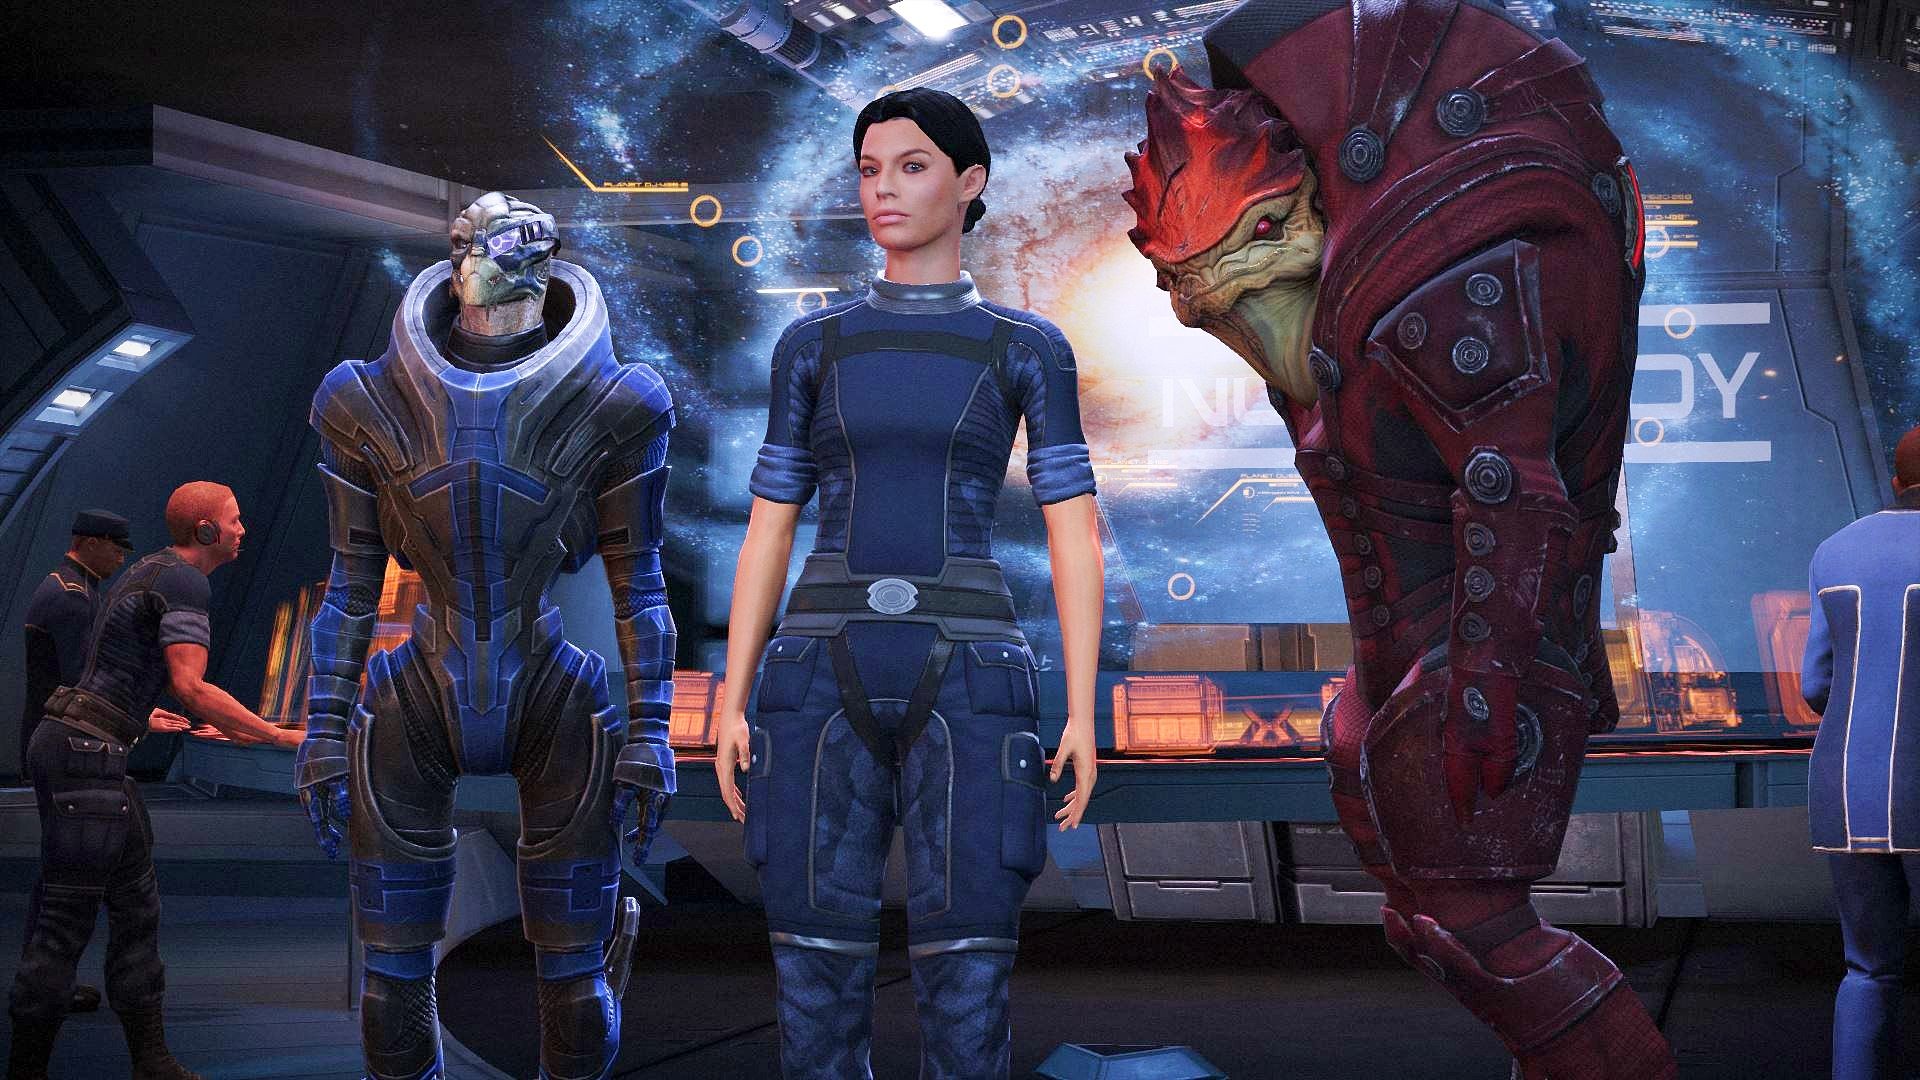 Scanning - Mass Effect 3 Guide - IGN